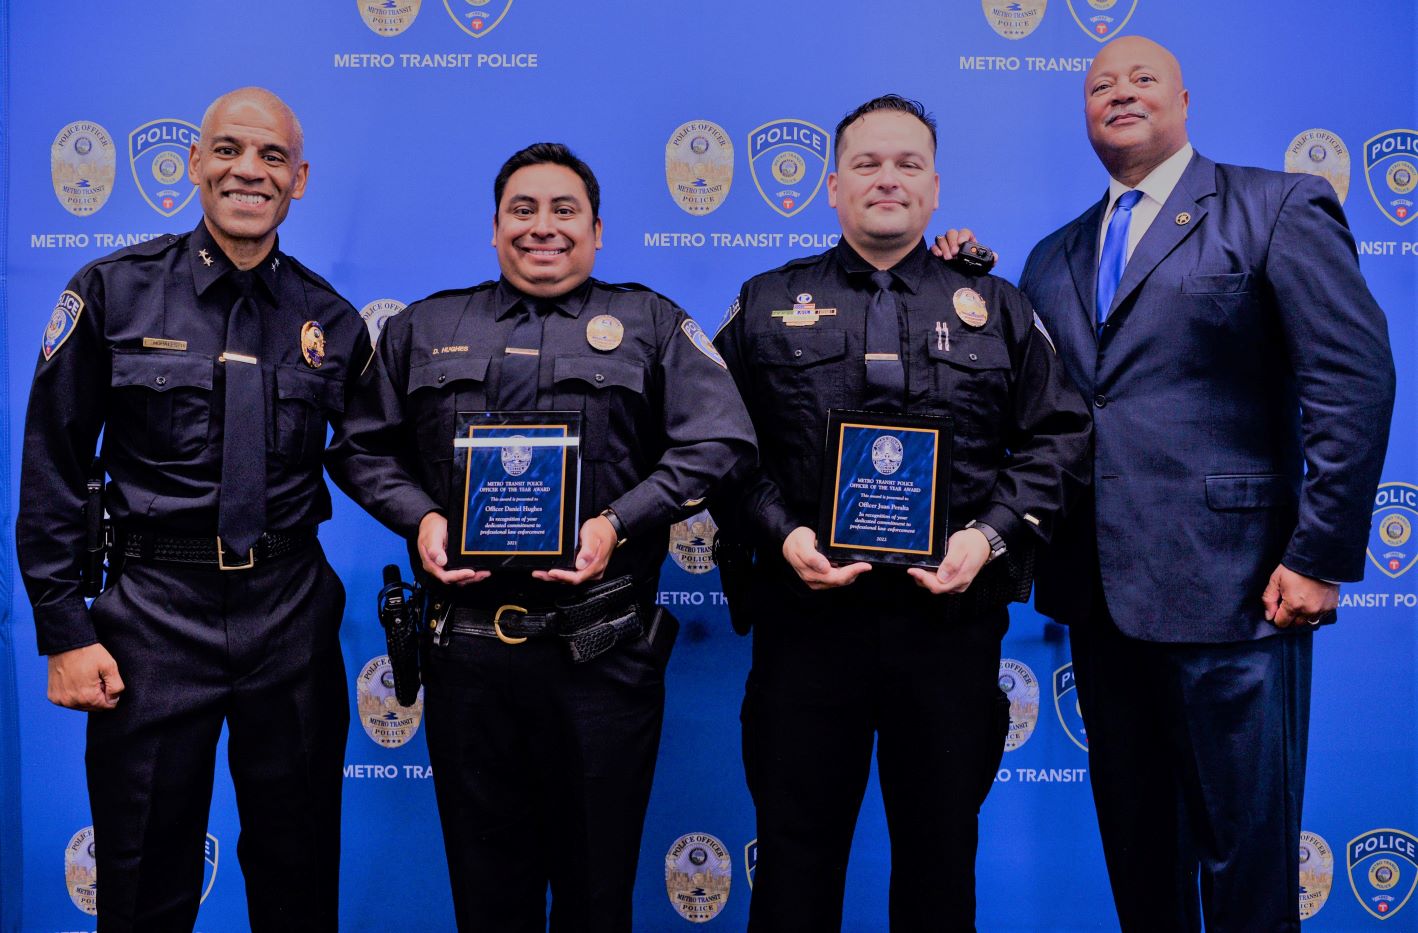 MTPD Chief Ernest Morales III, Officers of the Year Daniel Hughes (2021), Juan Peralta (2022), and former MTPD Chief Eddie Frizell